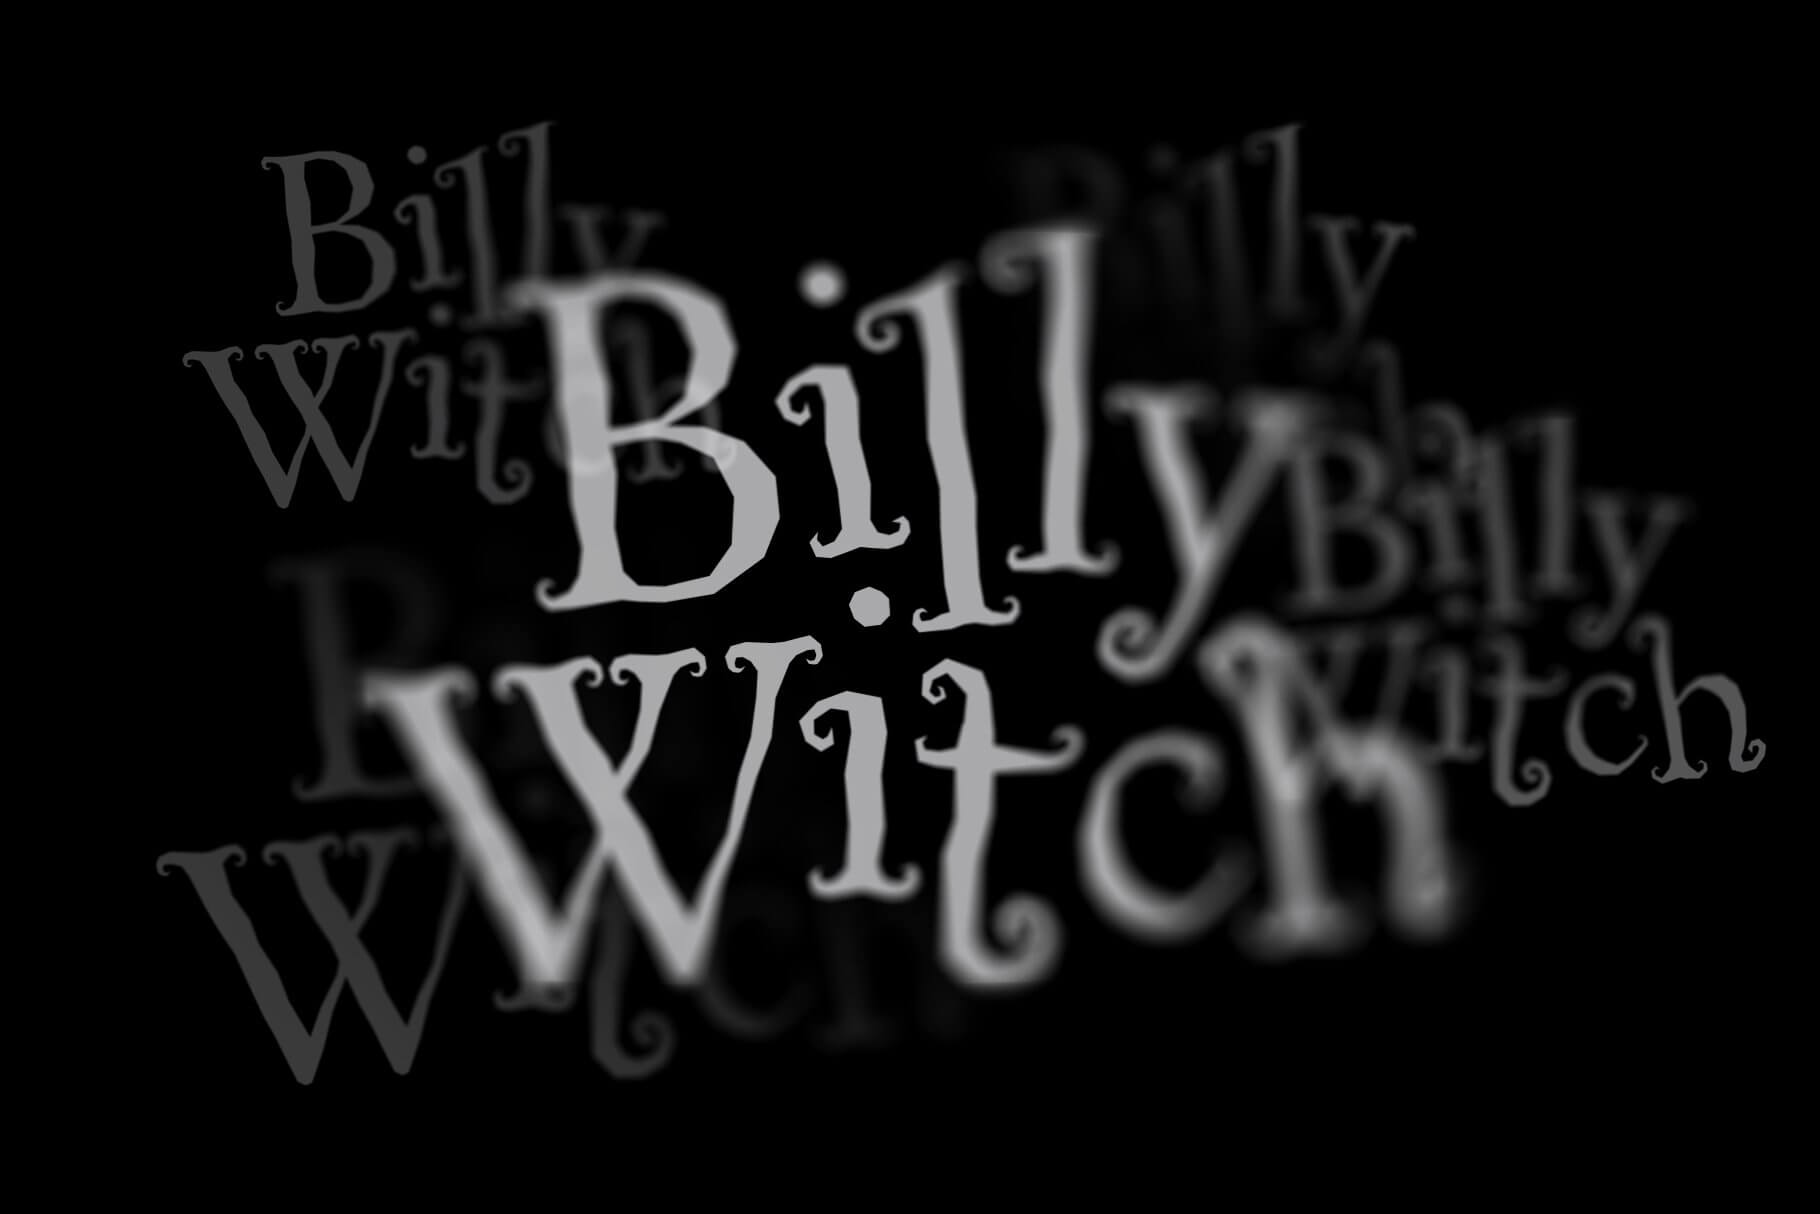 billy witch spellbinding swirly serif font for personal use.